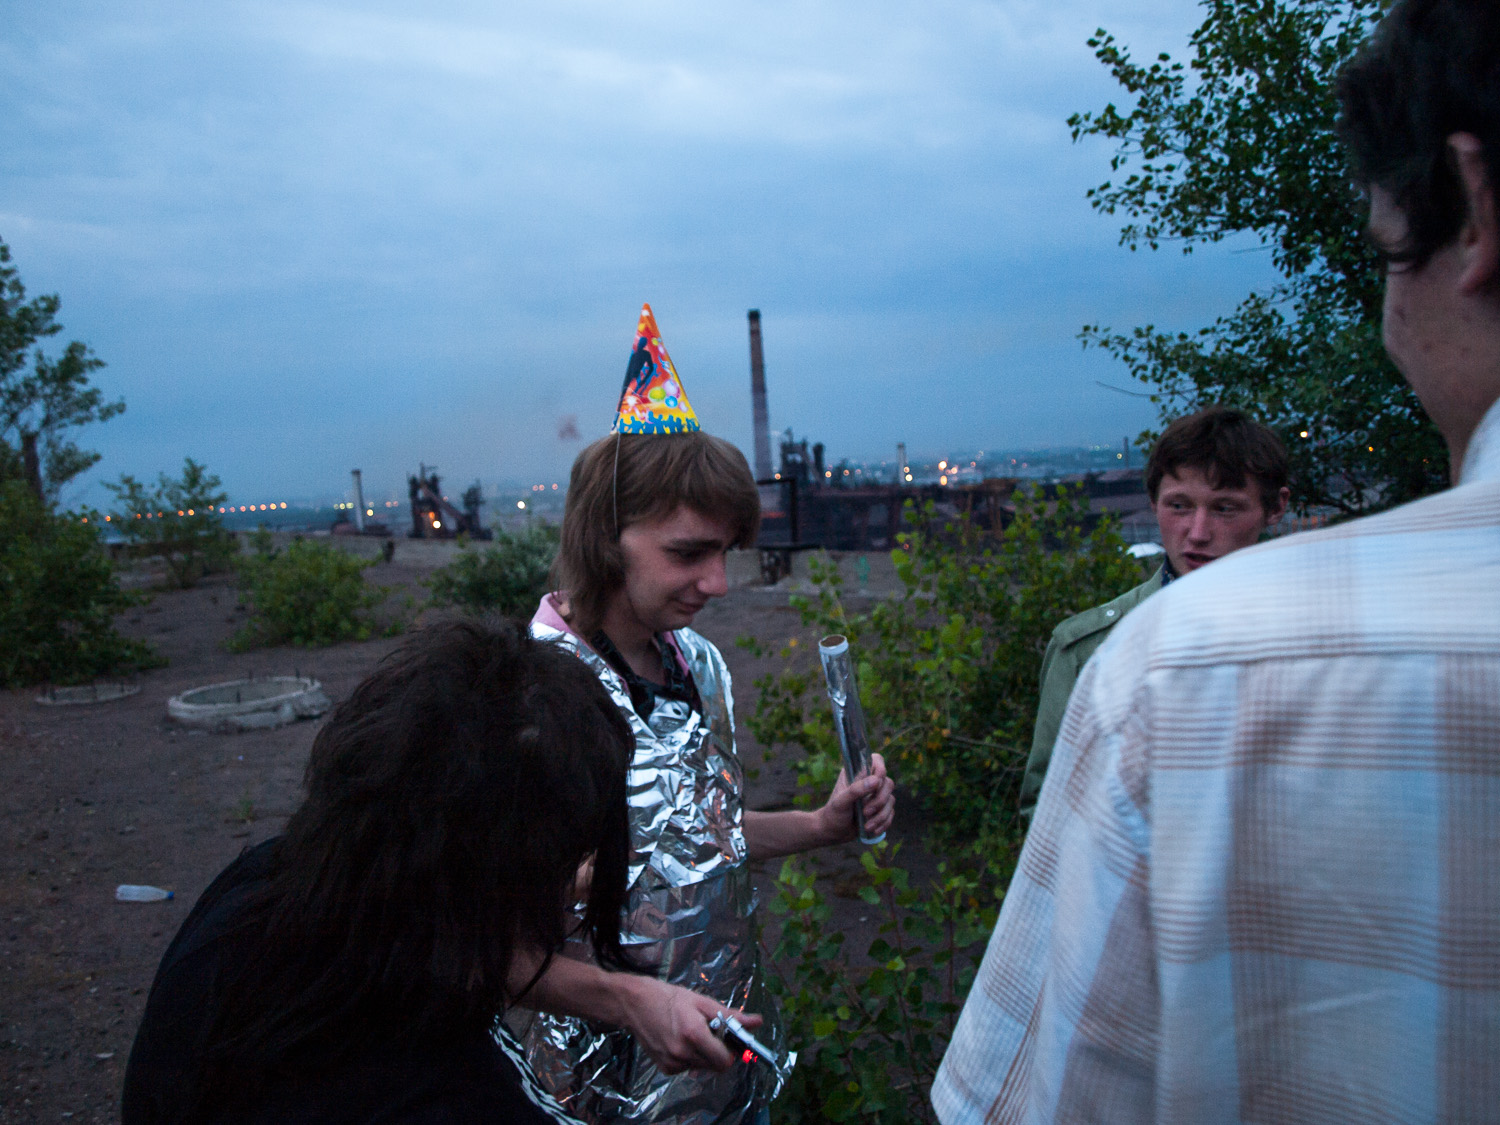  Young people celebrate a birthday on a factory roof in the industrial zone of Dnipro, east Ukraine, 2008. 